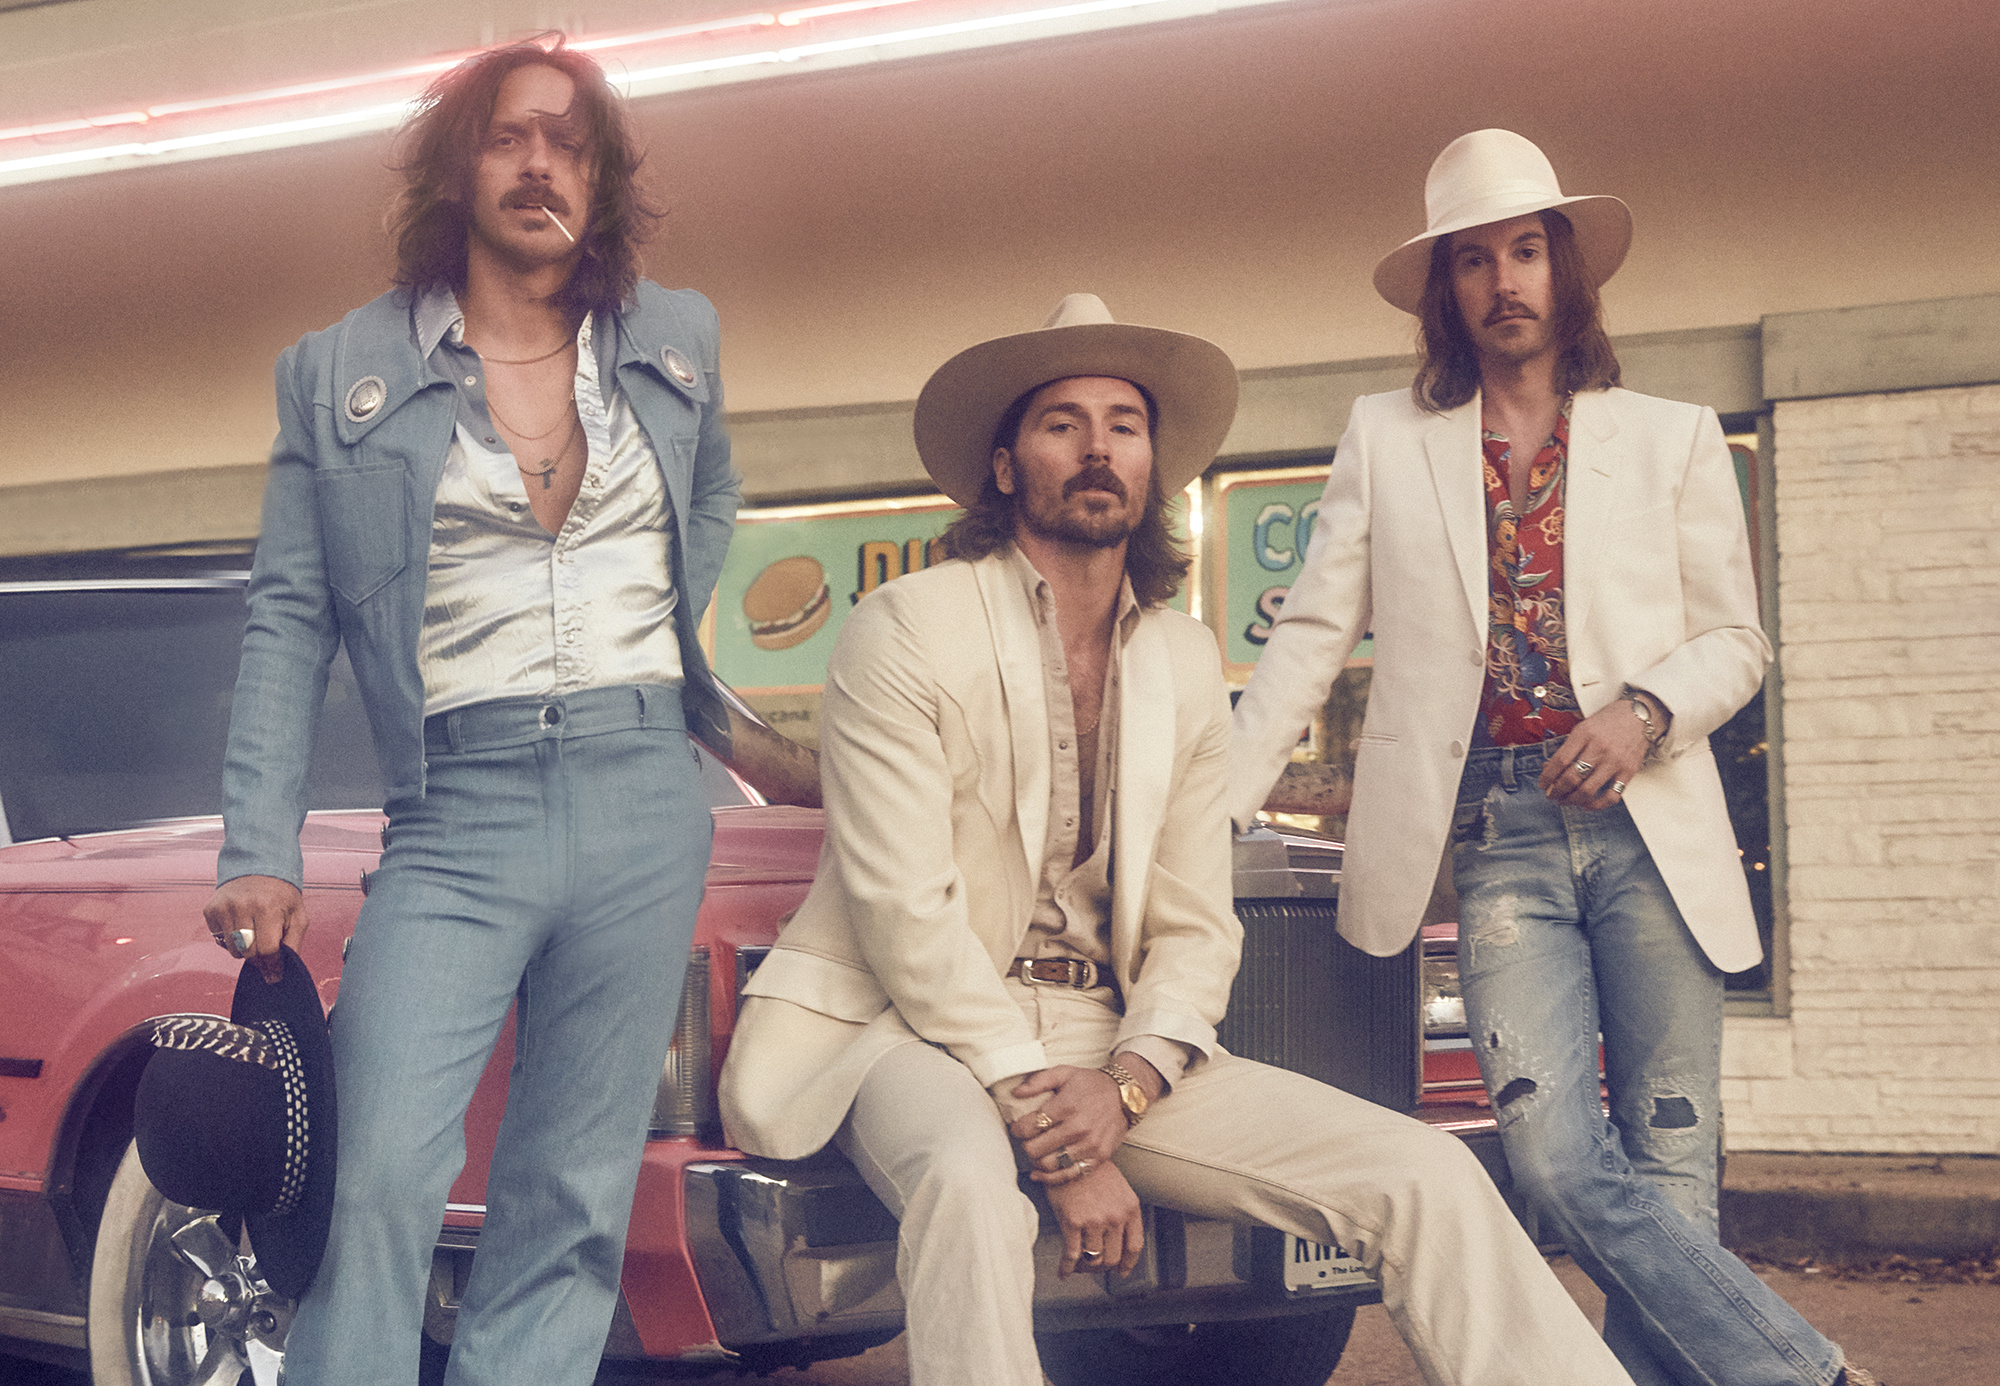 Midland Band, Exclusive interview, Personal anecdotes, Sonic Ranch experience, 2000x1390 HD Desktop